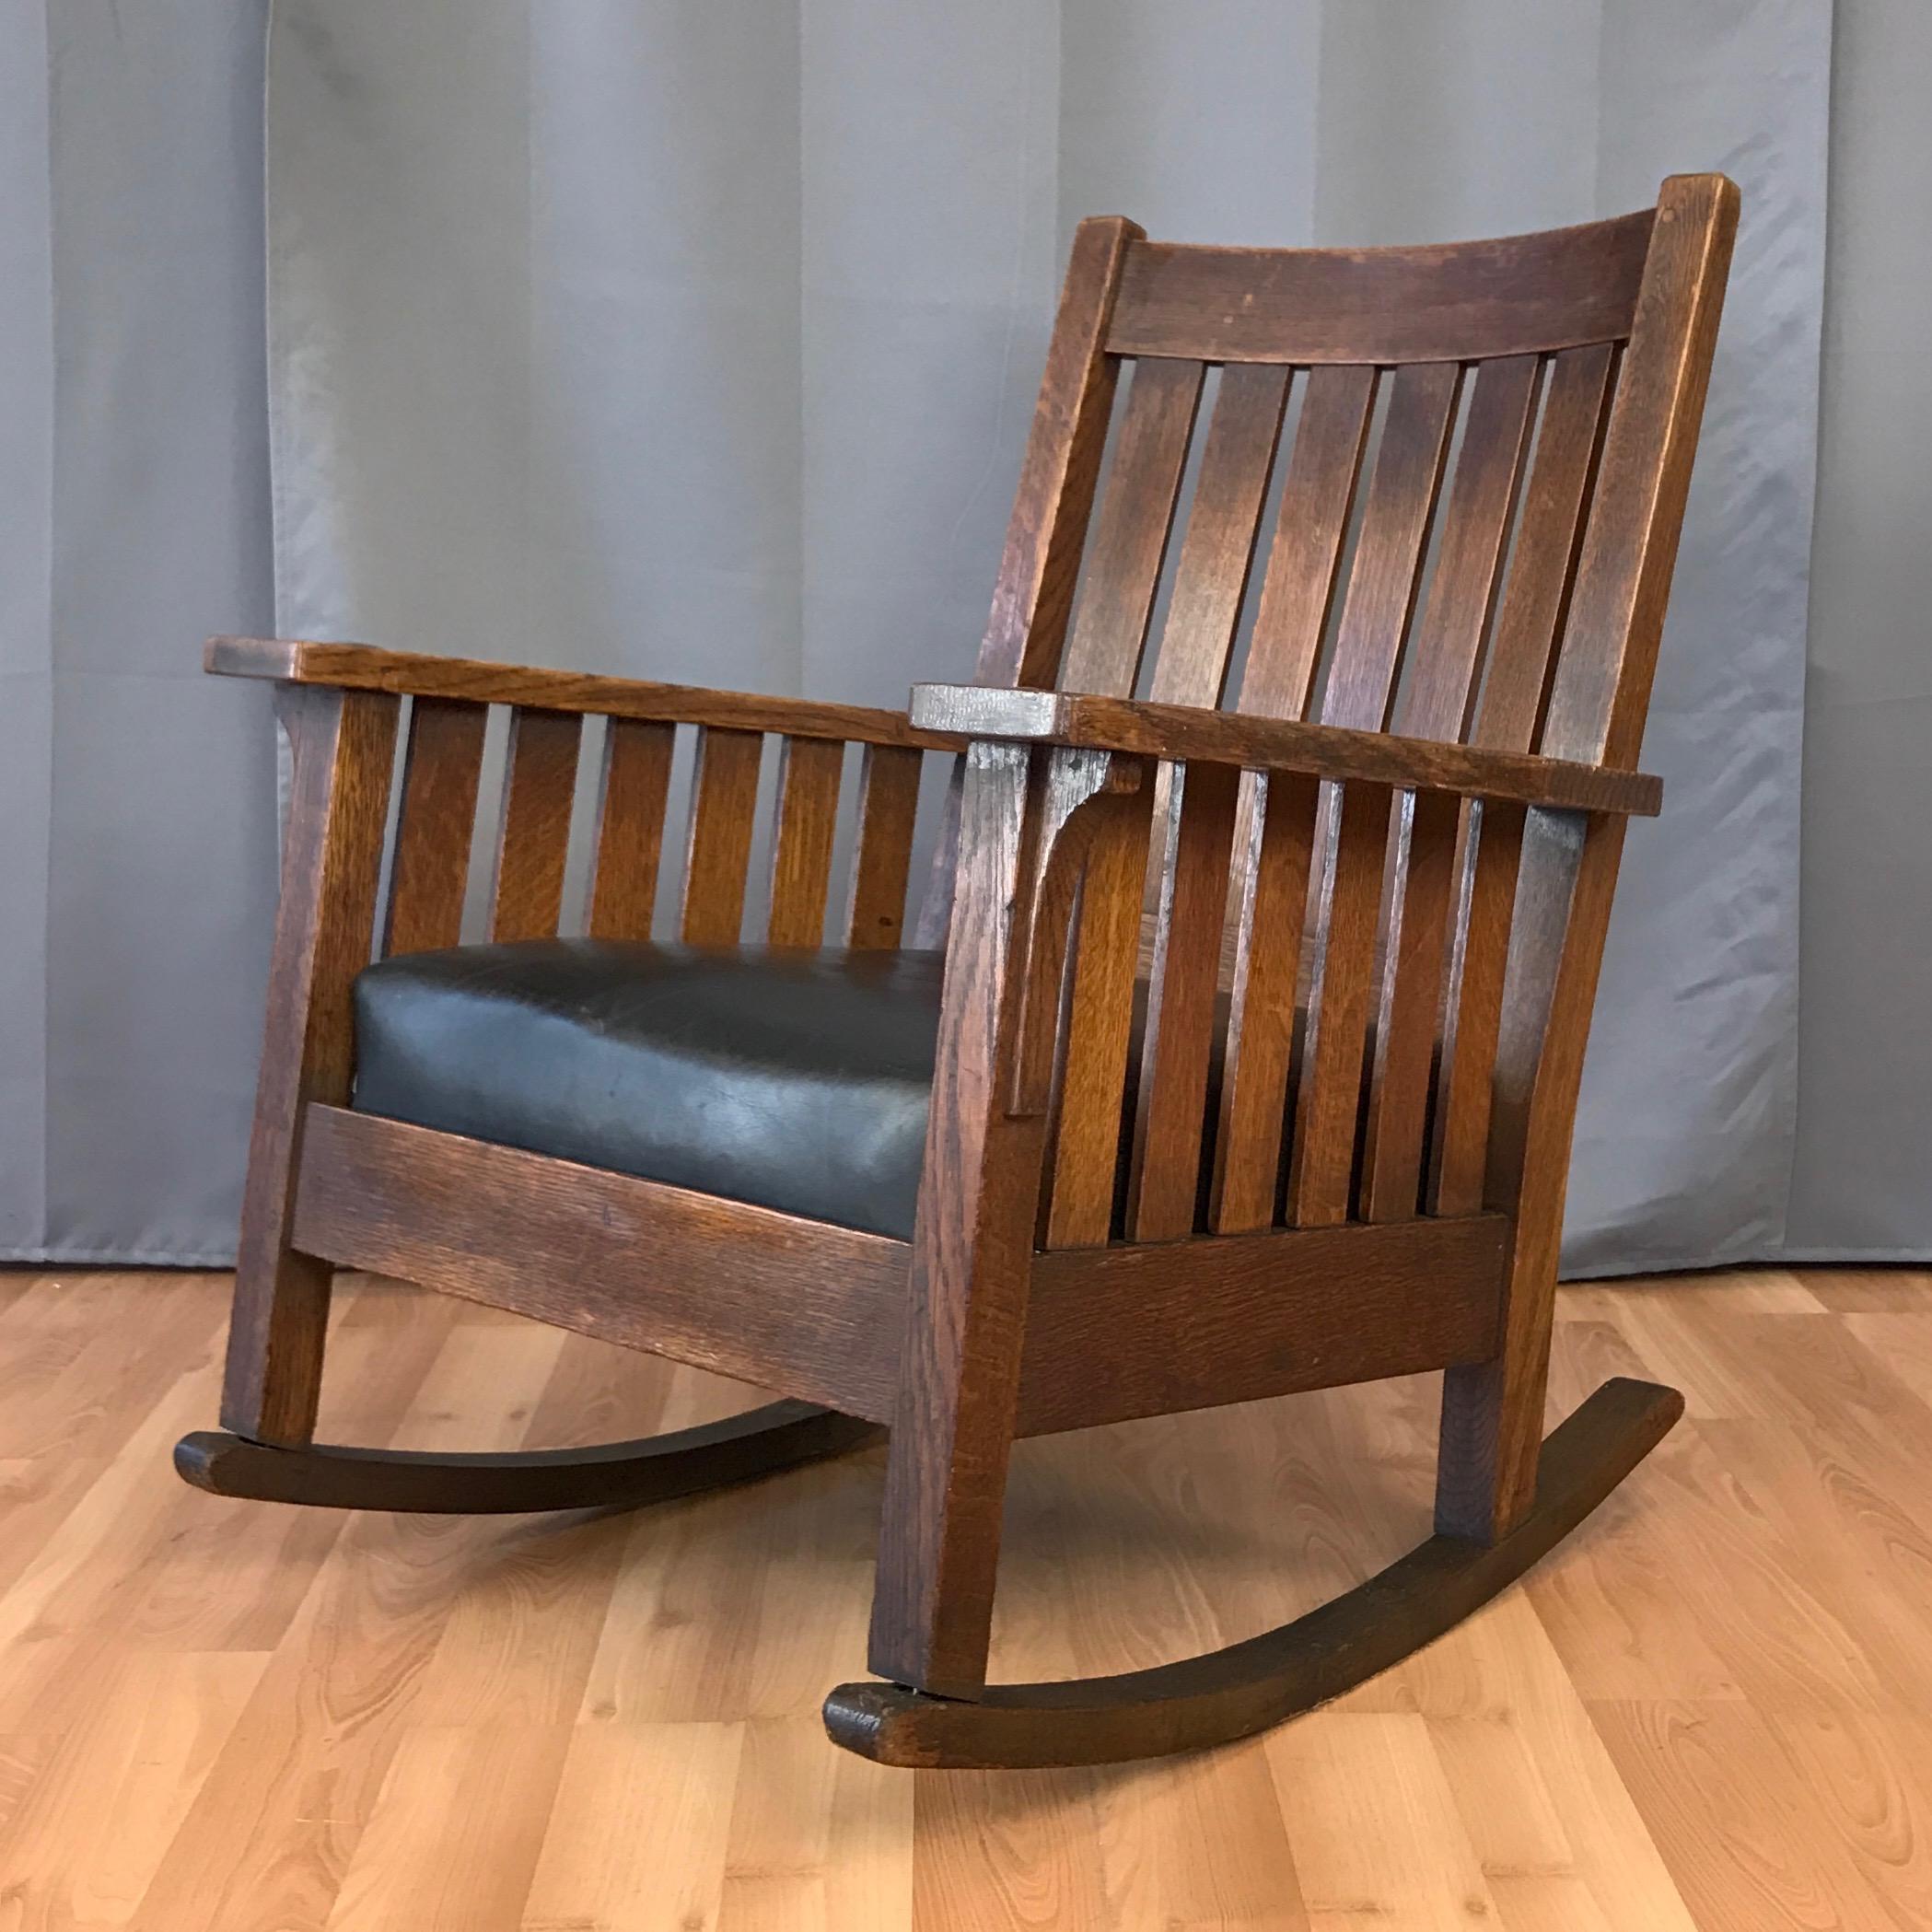 A 1920s L. & J.G. Stickley Arts & Crafts oak and leather rocker with original label.

Early 20th century American classic in quarter sawn oak with vertical slat sides and back. Original finish with natural patina and light wear exudes handsome